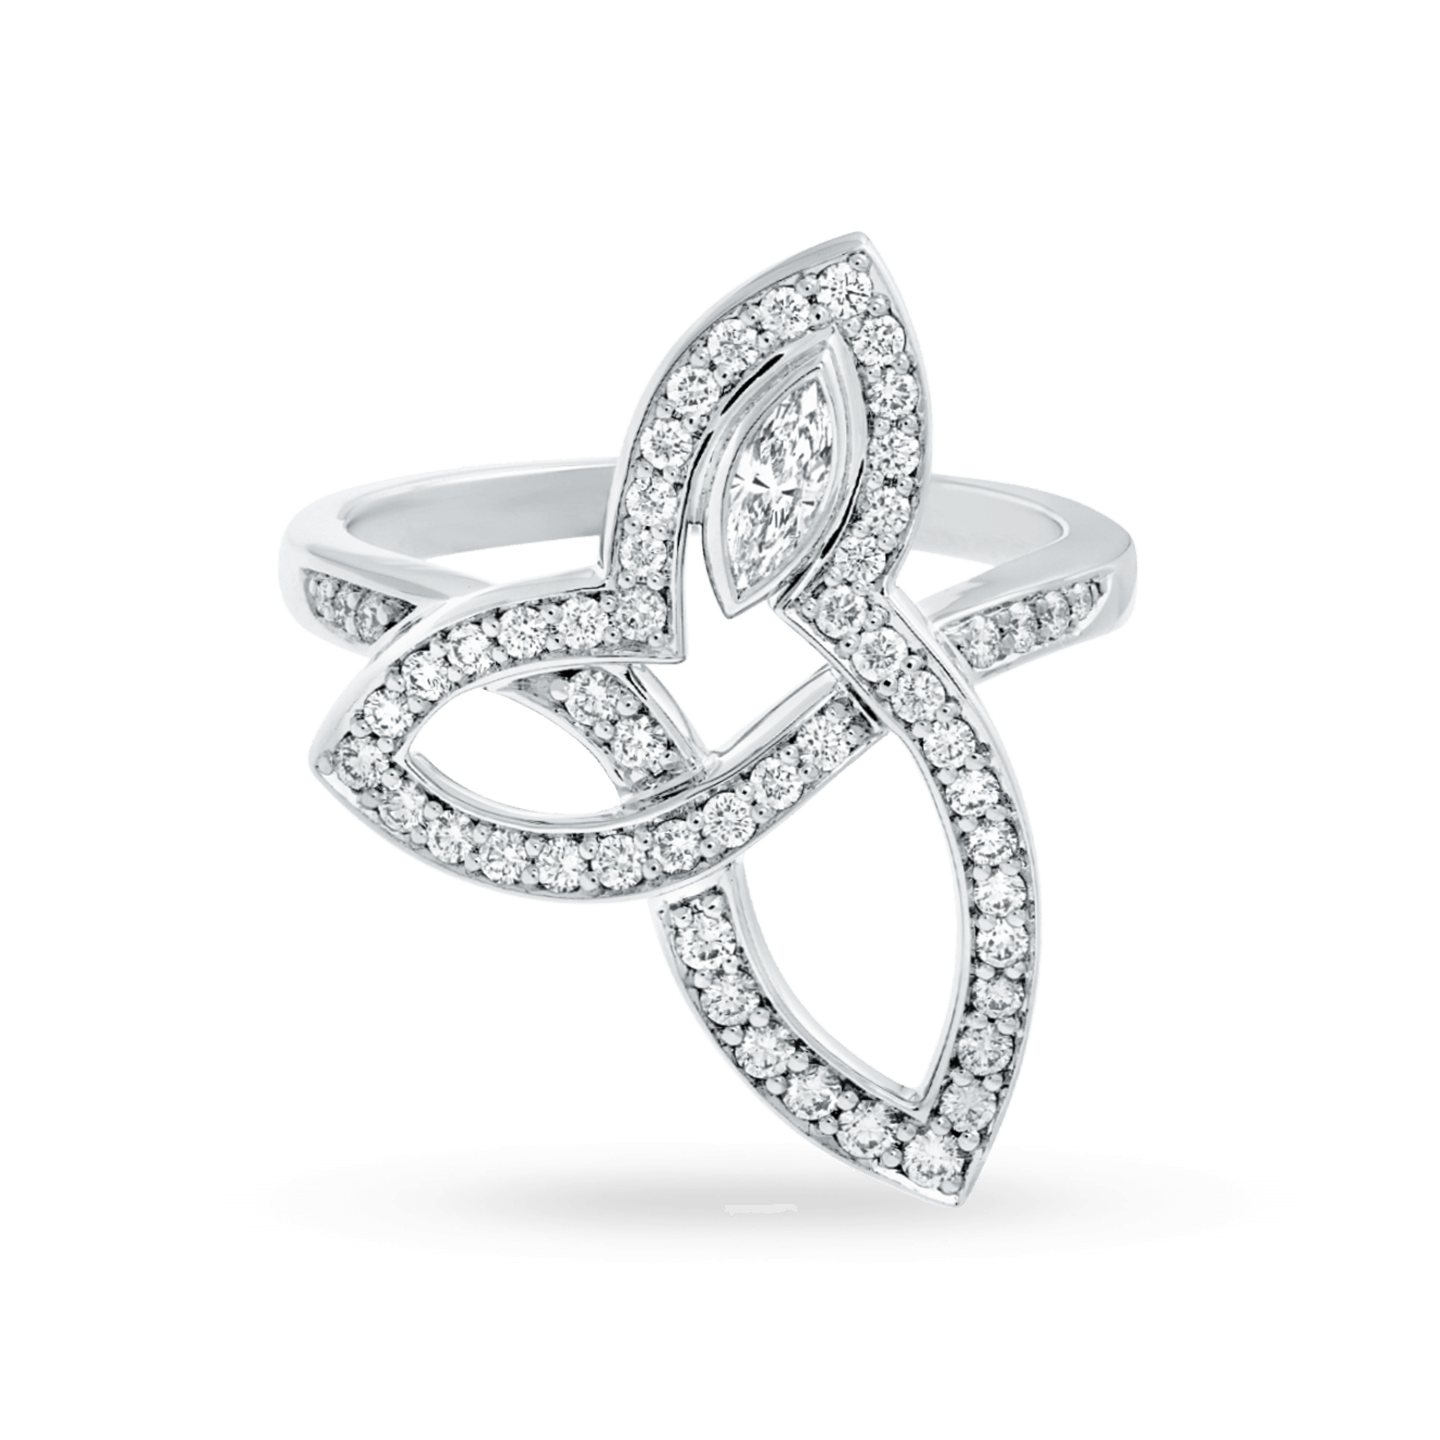 Lily Cluster Diamond Ring in Platinum | Harry Winston